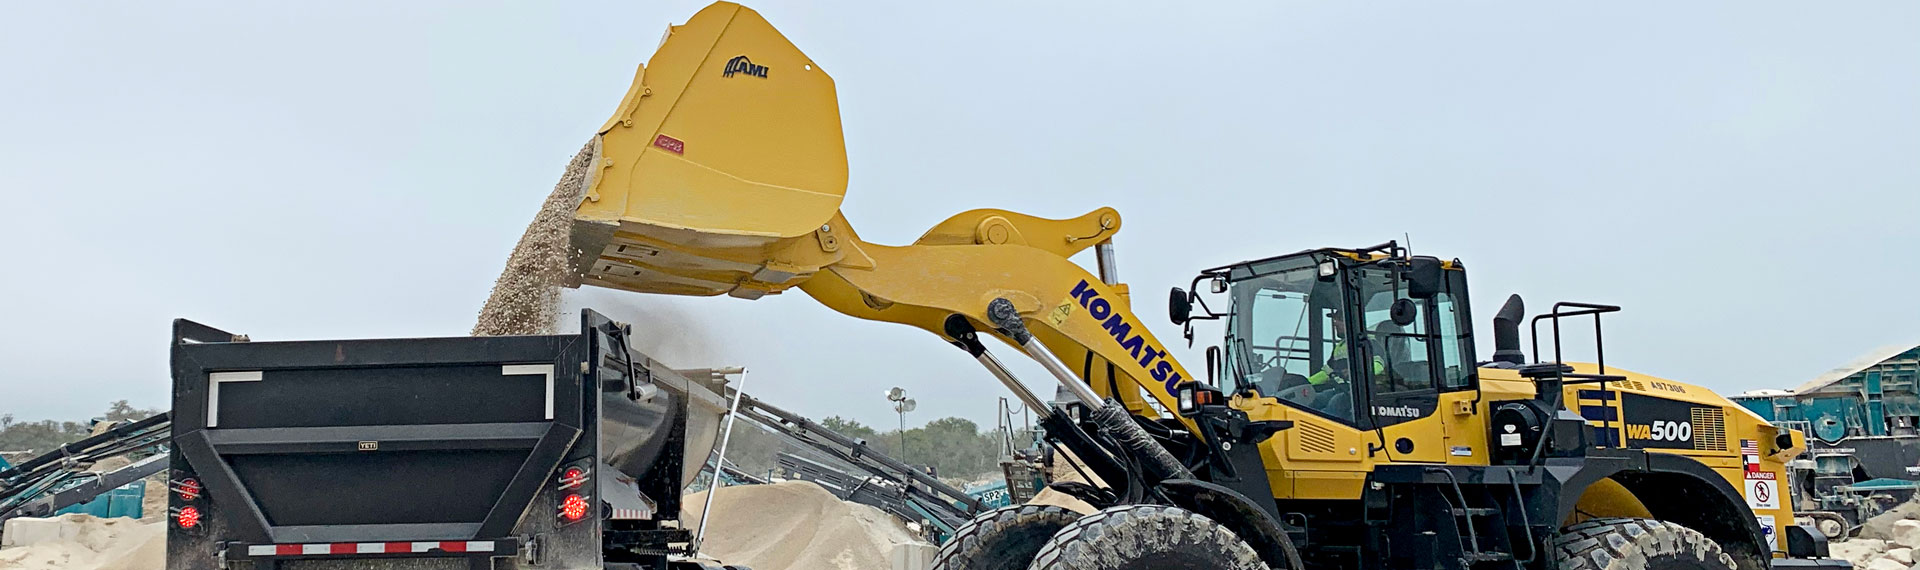 Canadian manufacturer uses Hardox® 500 Tuf to build a better heavy-duty bucket for quarries, recycling operations and municipalities.